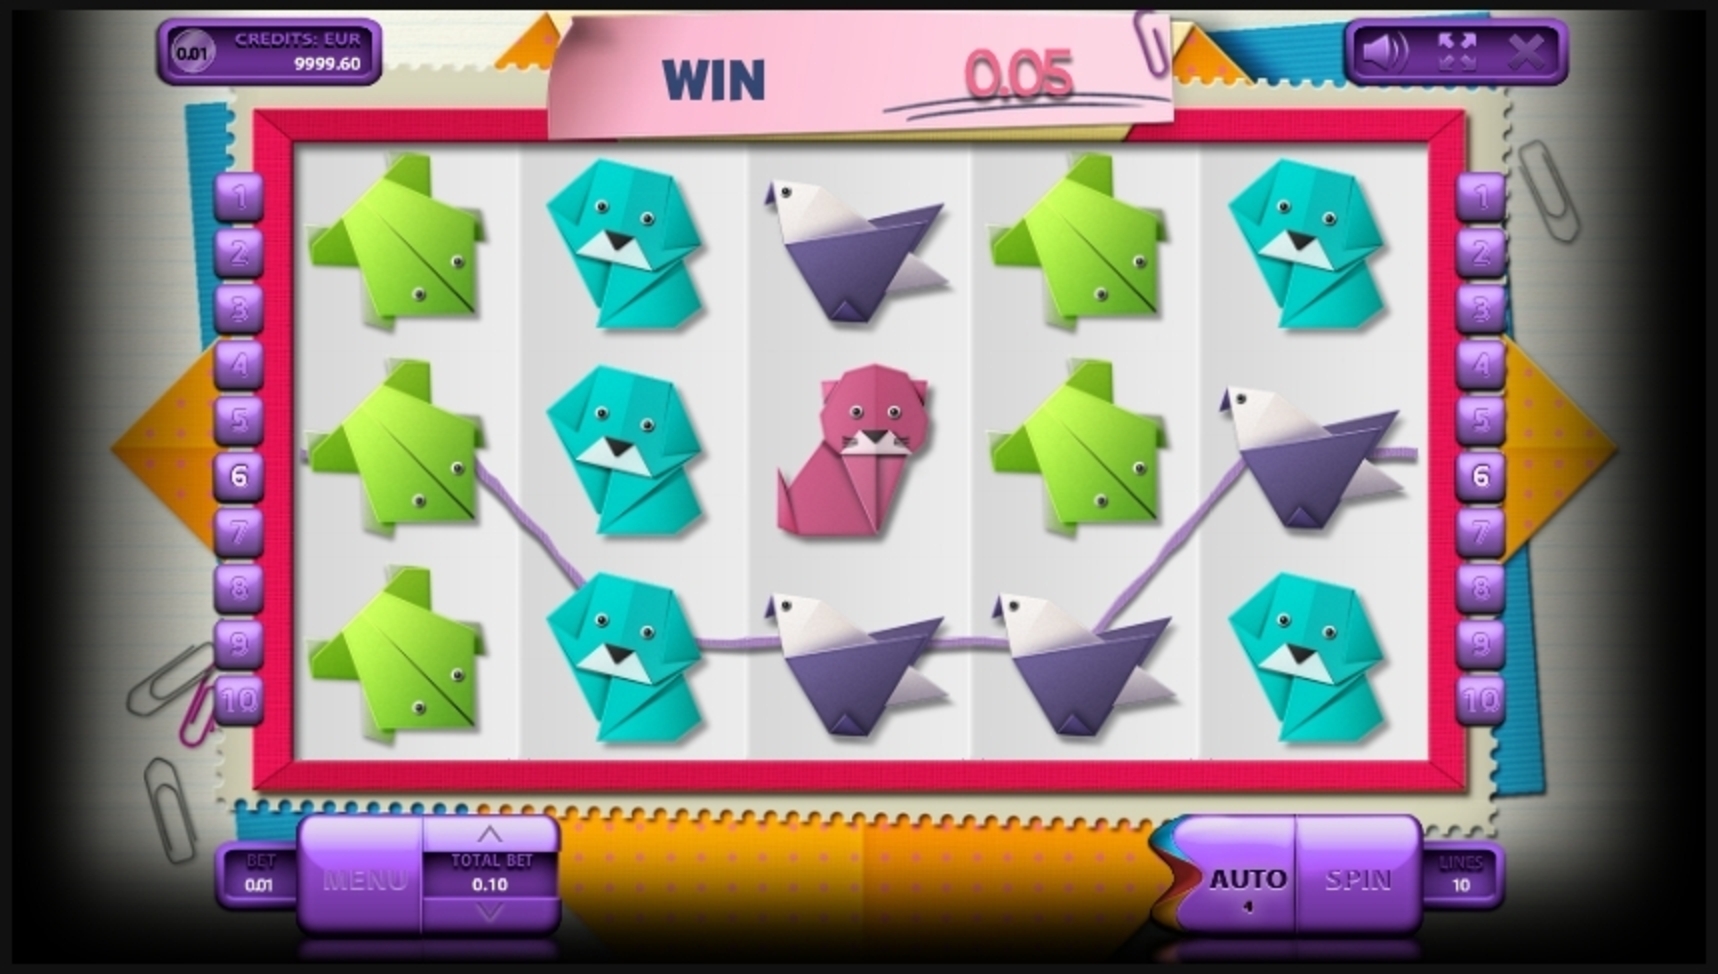 Win Money in Origami Free Slot Game by Endorphina